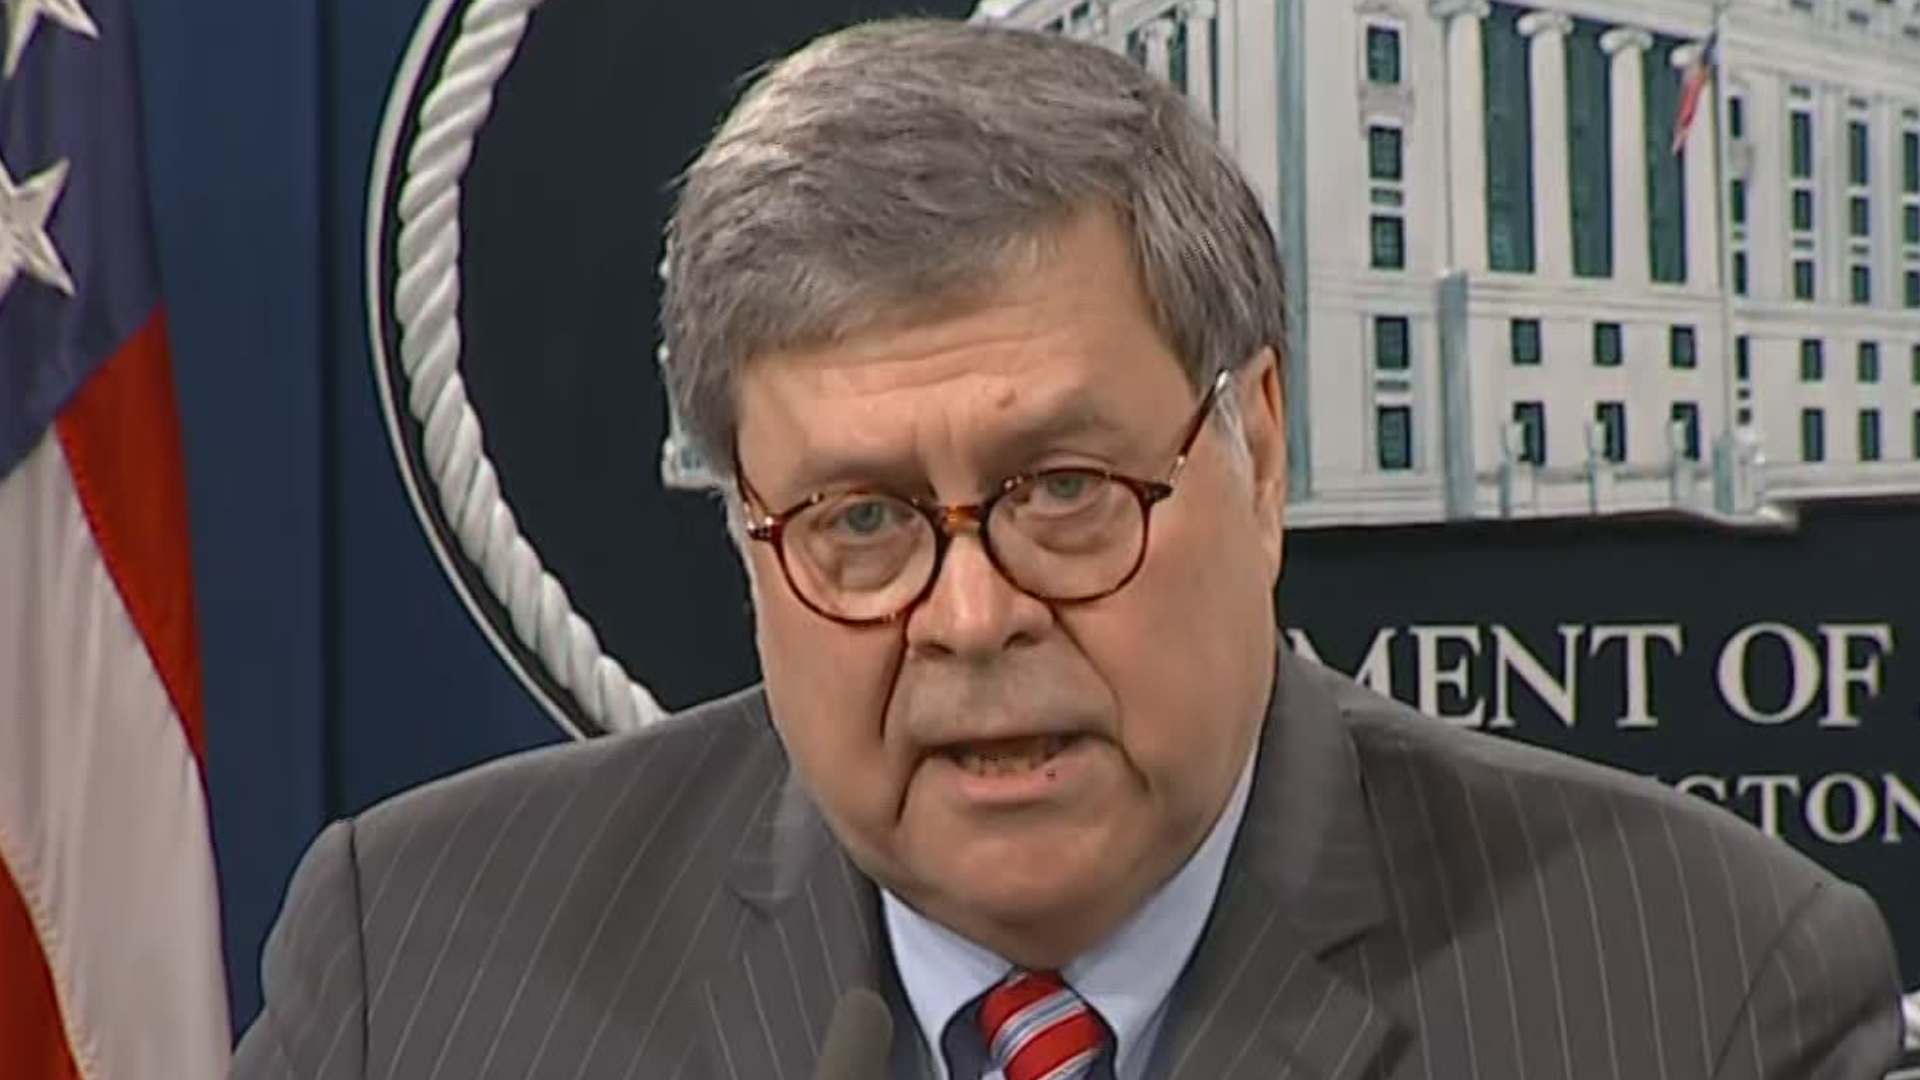 Attorney General William Barr comments on the Justice Department's work with tech companies and Apple's security level in investigations.